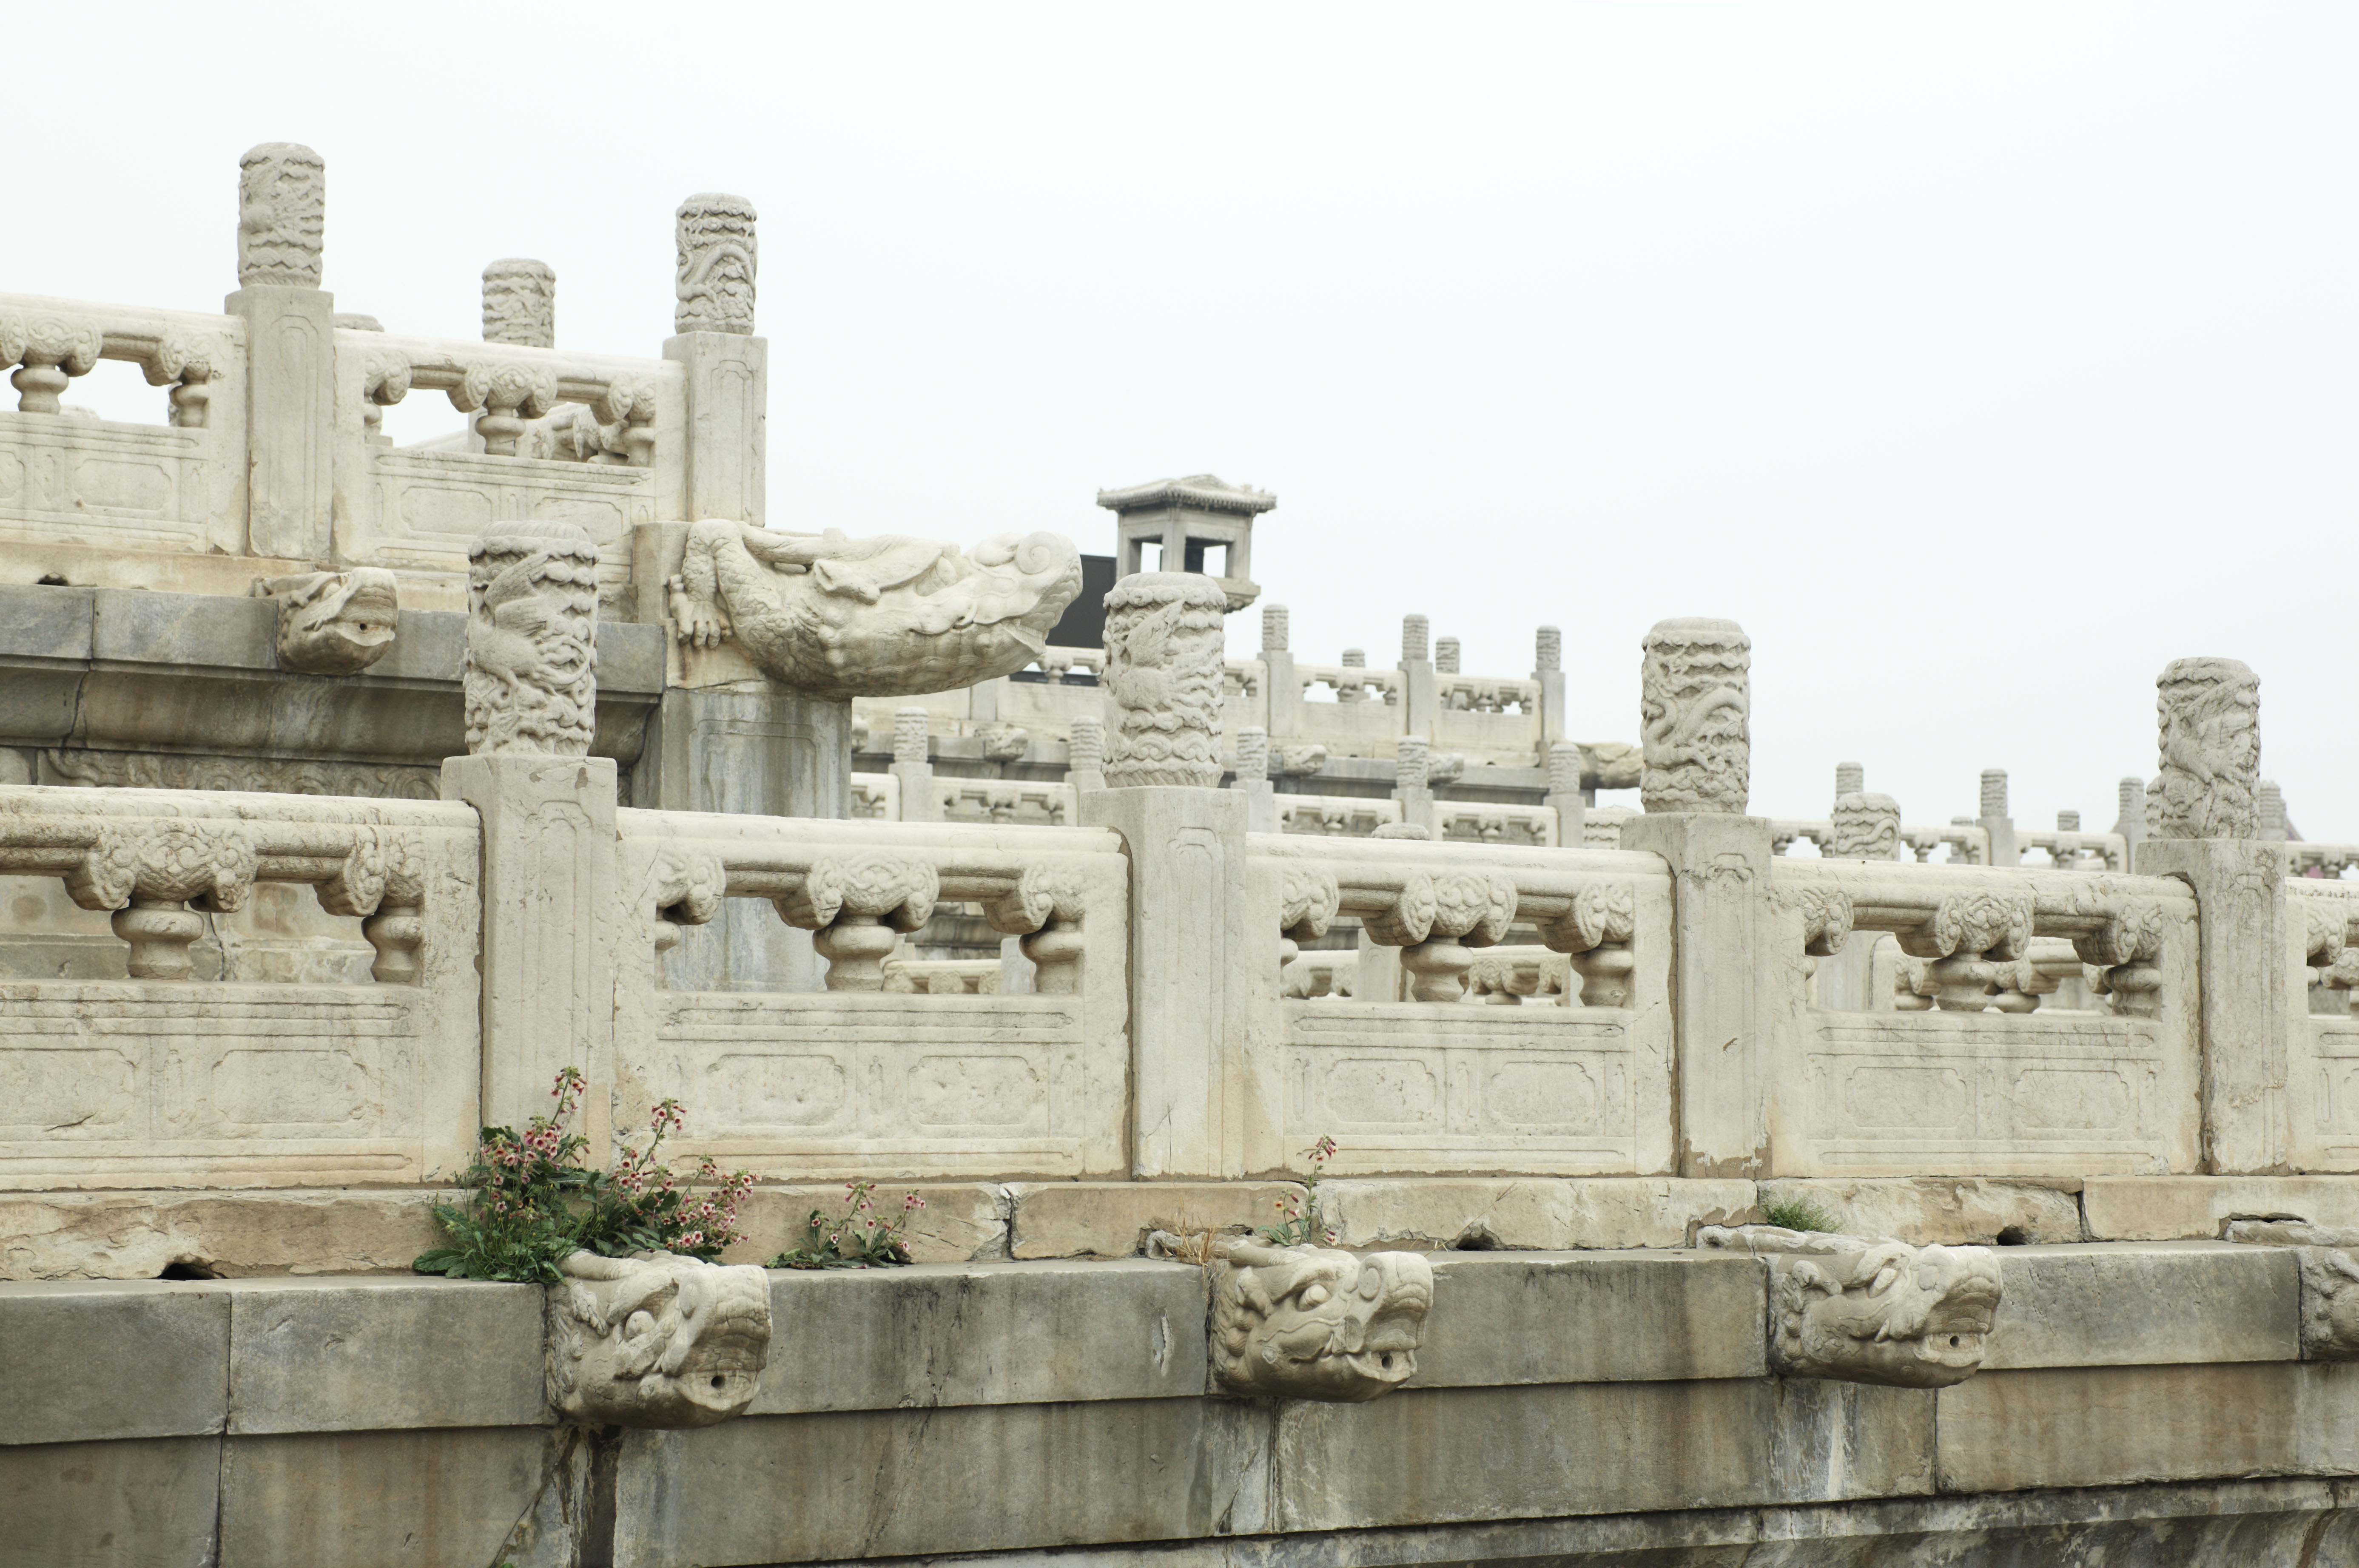 photo,material,free,landscape,picture,stock photo,Creative Commons,The foundation stone of the old palace, stone pillar, fence, Relief, hierarchy